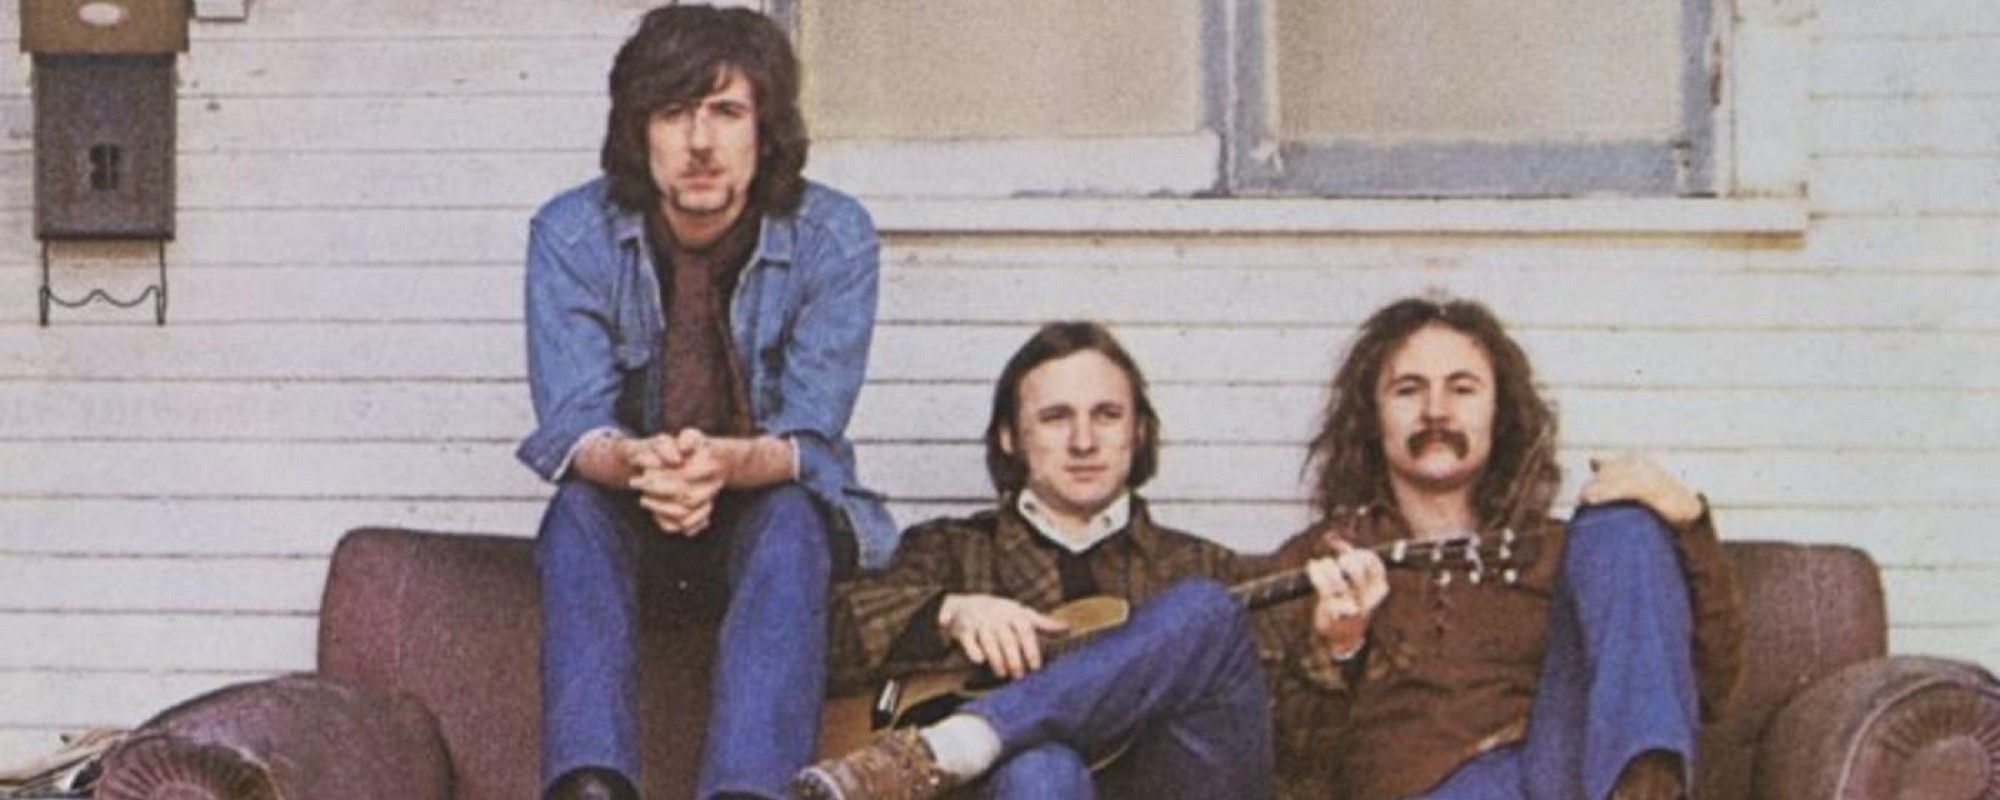 On This Day in 1969: Crosby, Stills & Nash Released Their Genre-Defining Self-Titled Debut Album